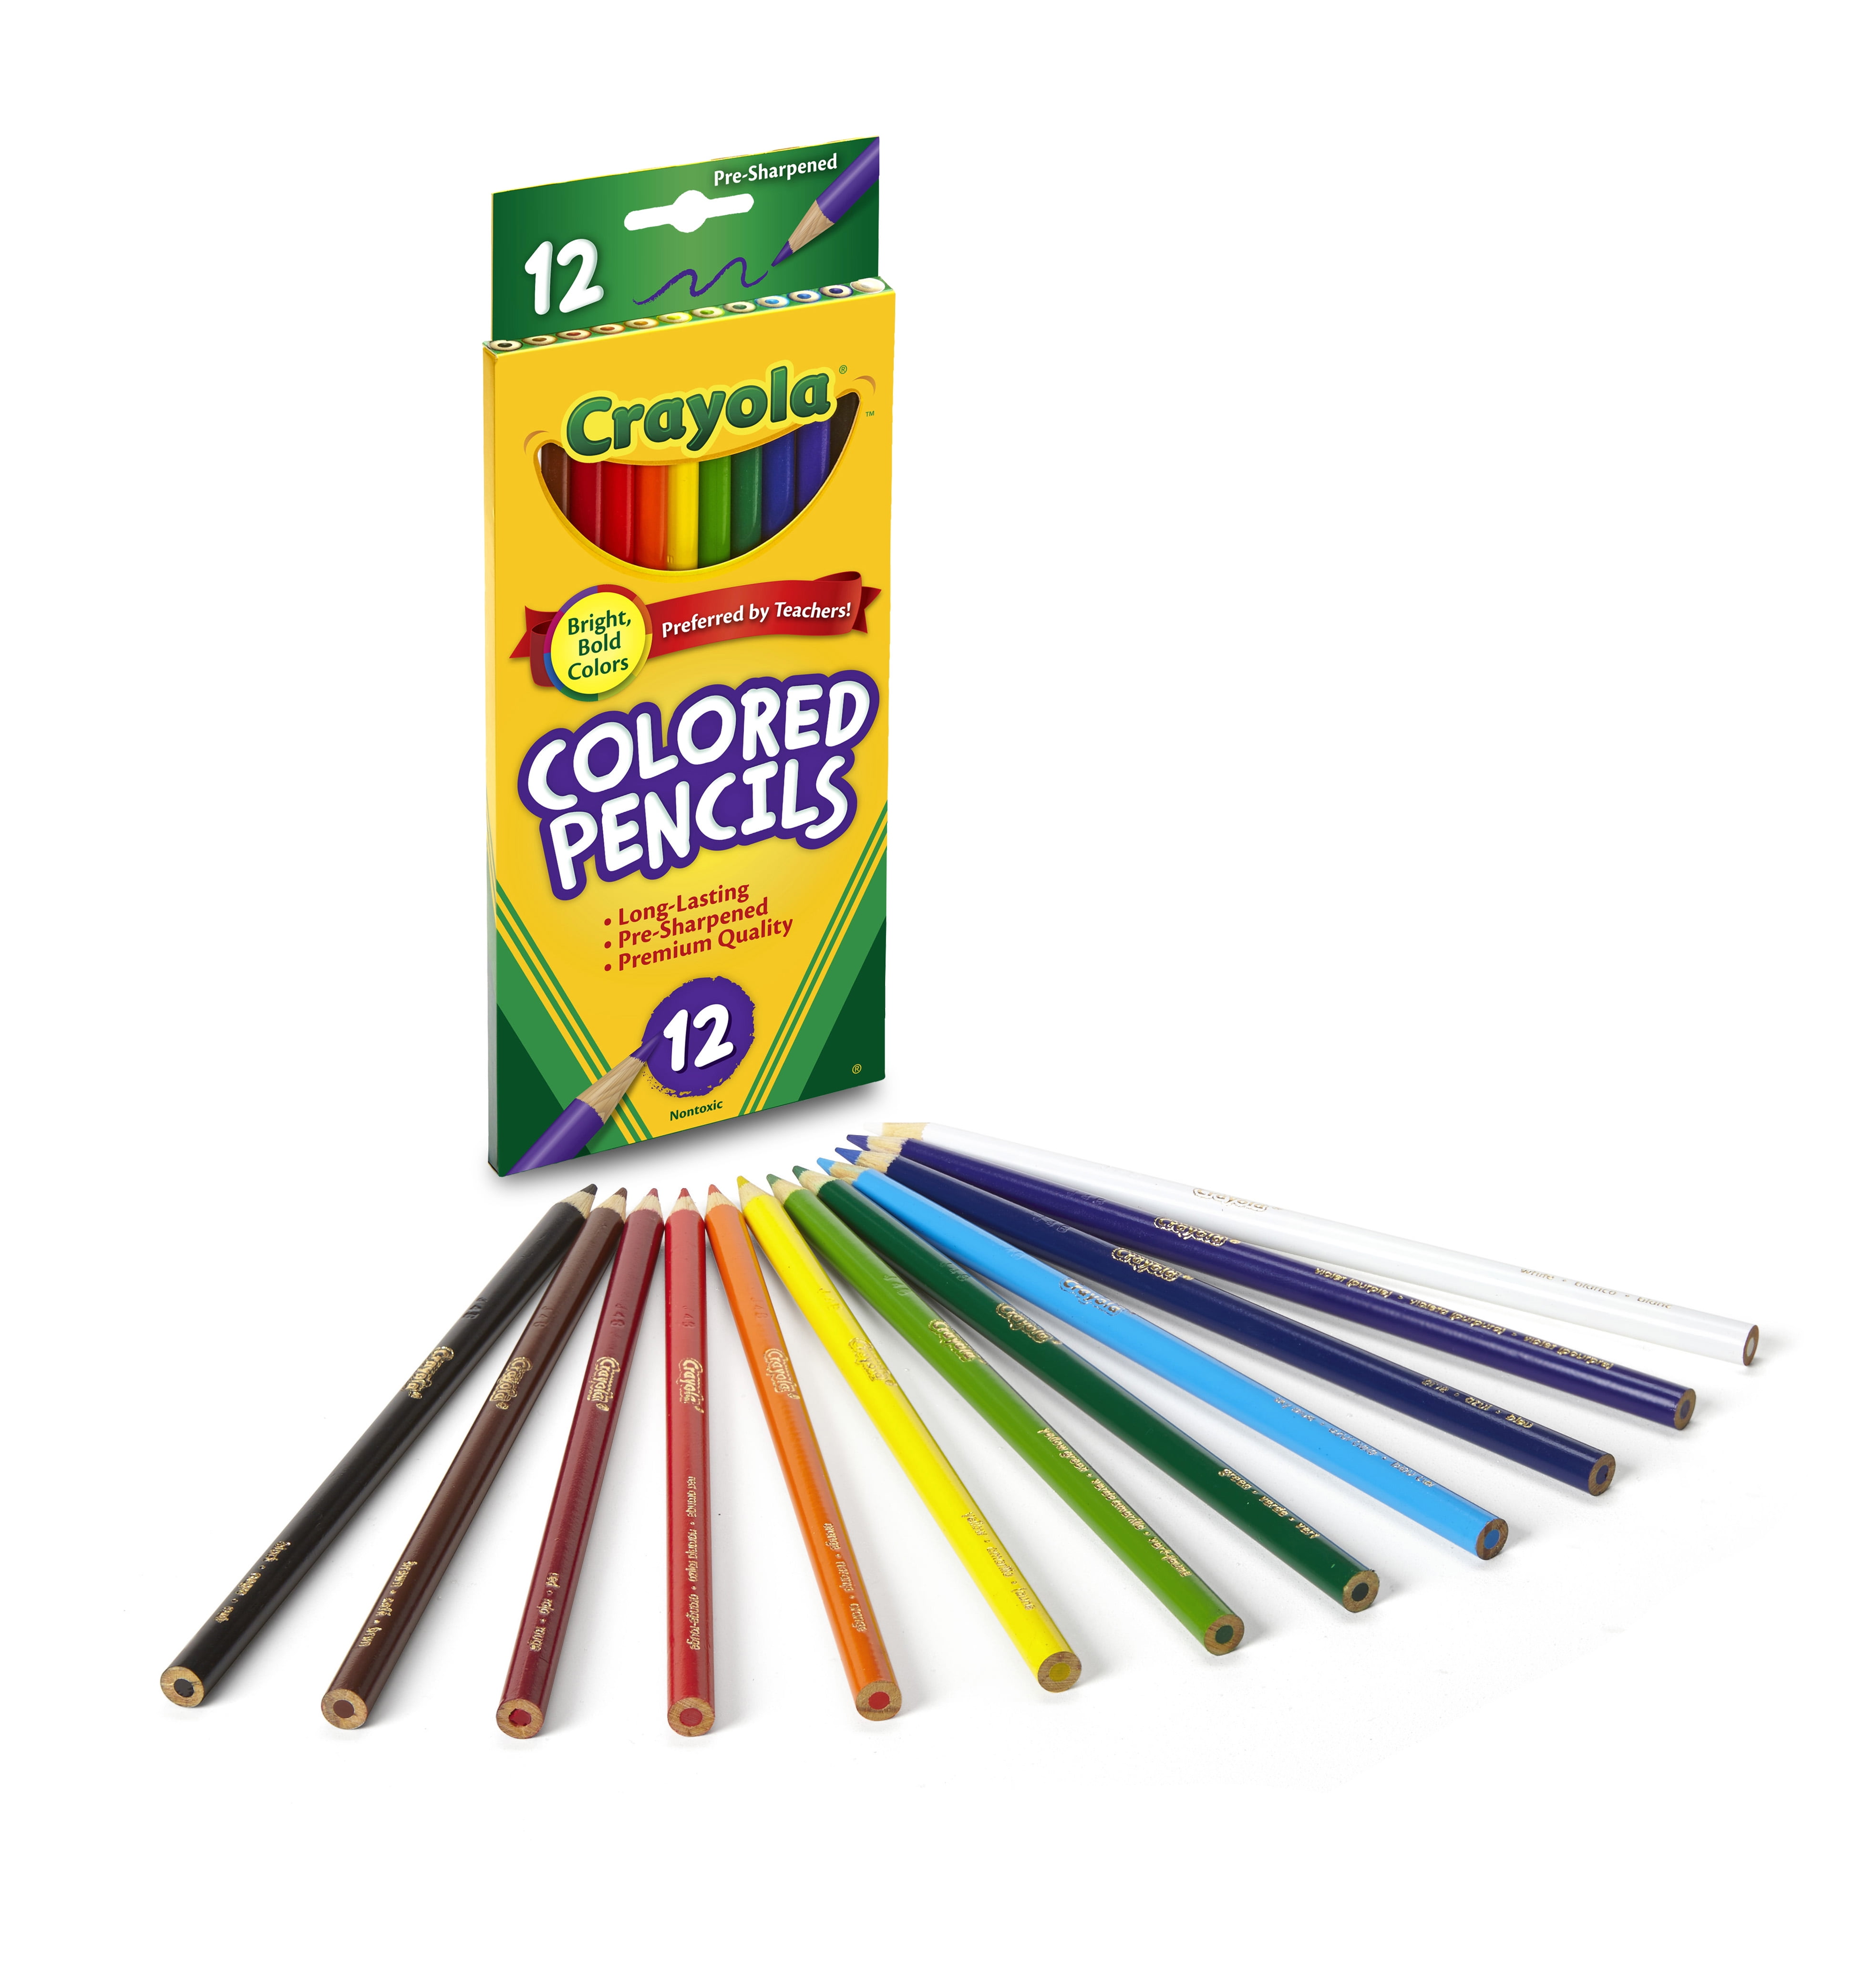 Review – 12 pack of Crayola Colored Pencils